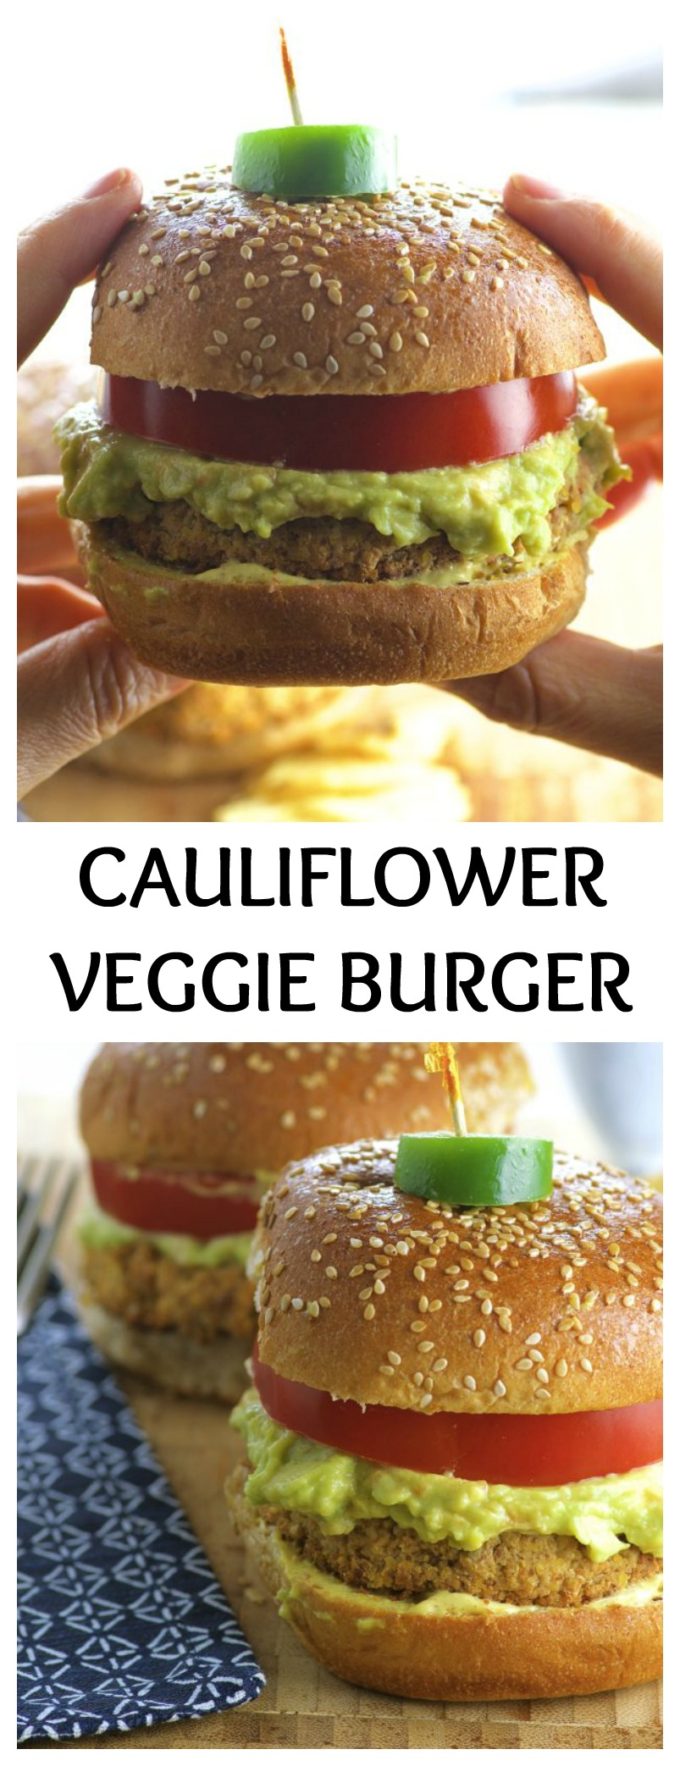 Yes, we know what you're thinking... Another cauliflower recipe, another veggie burger... Boooring! Ok, maybe. It all depends on how you look at it. And we don't know, since we're not you and we can't get inside your head (yet anyway). But what we CAN do, is tell you why we think this Cauliflower Veggie Burger is awesome..